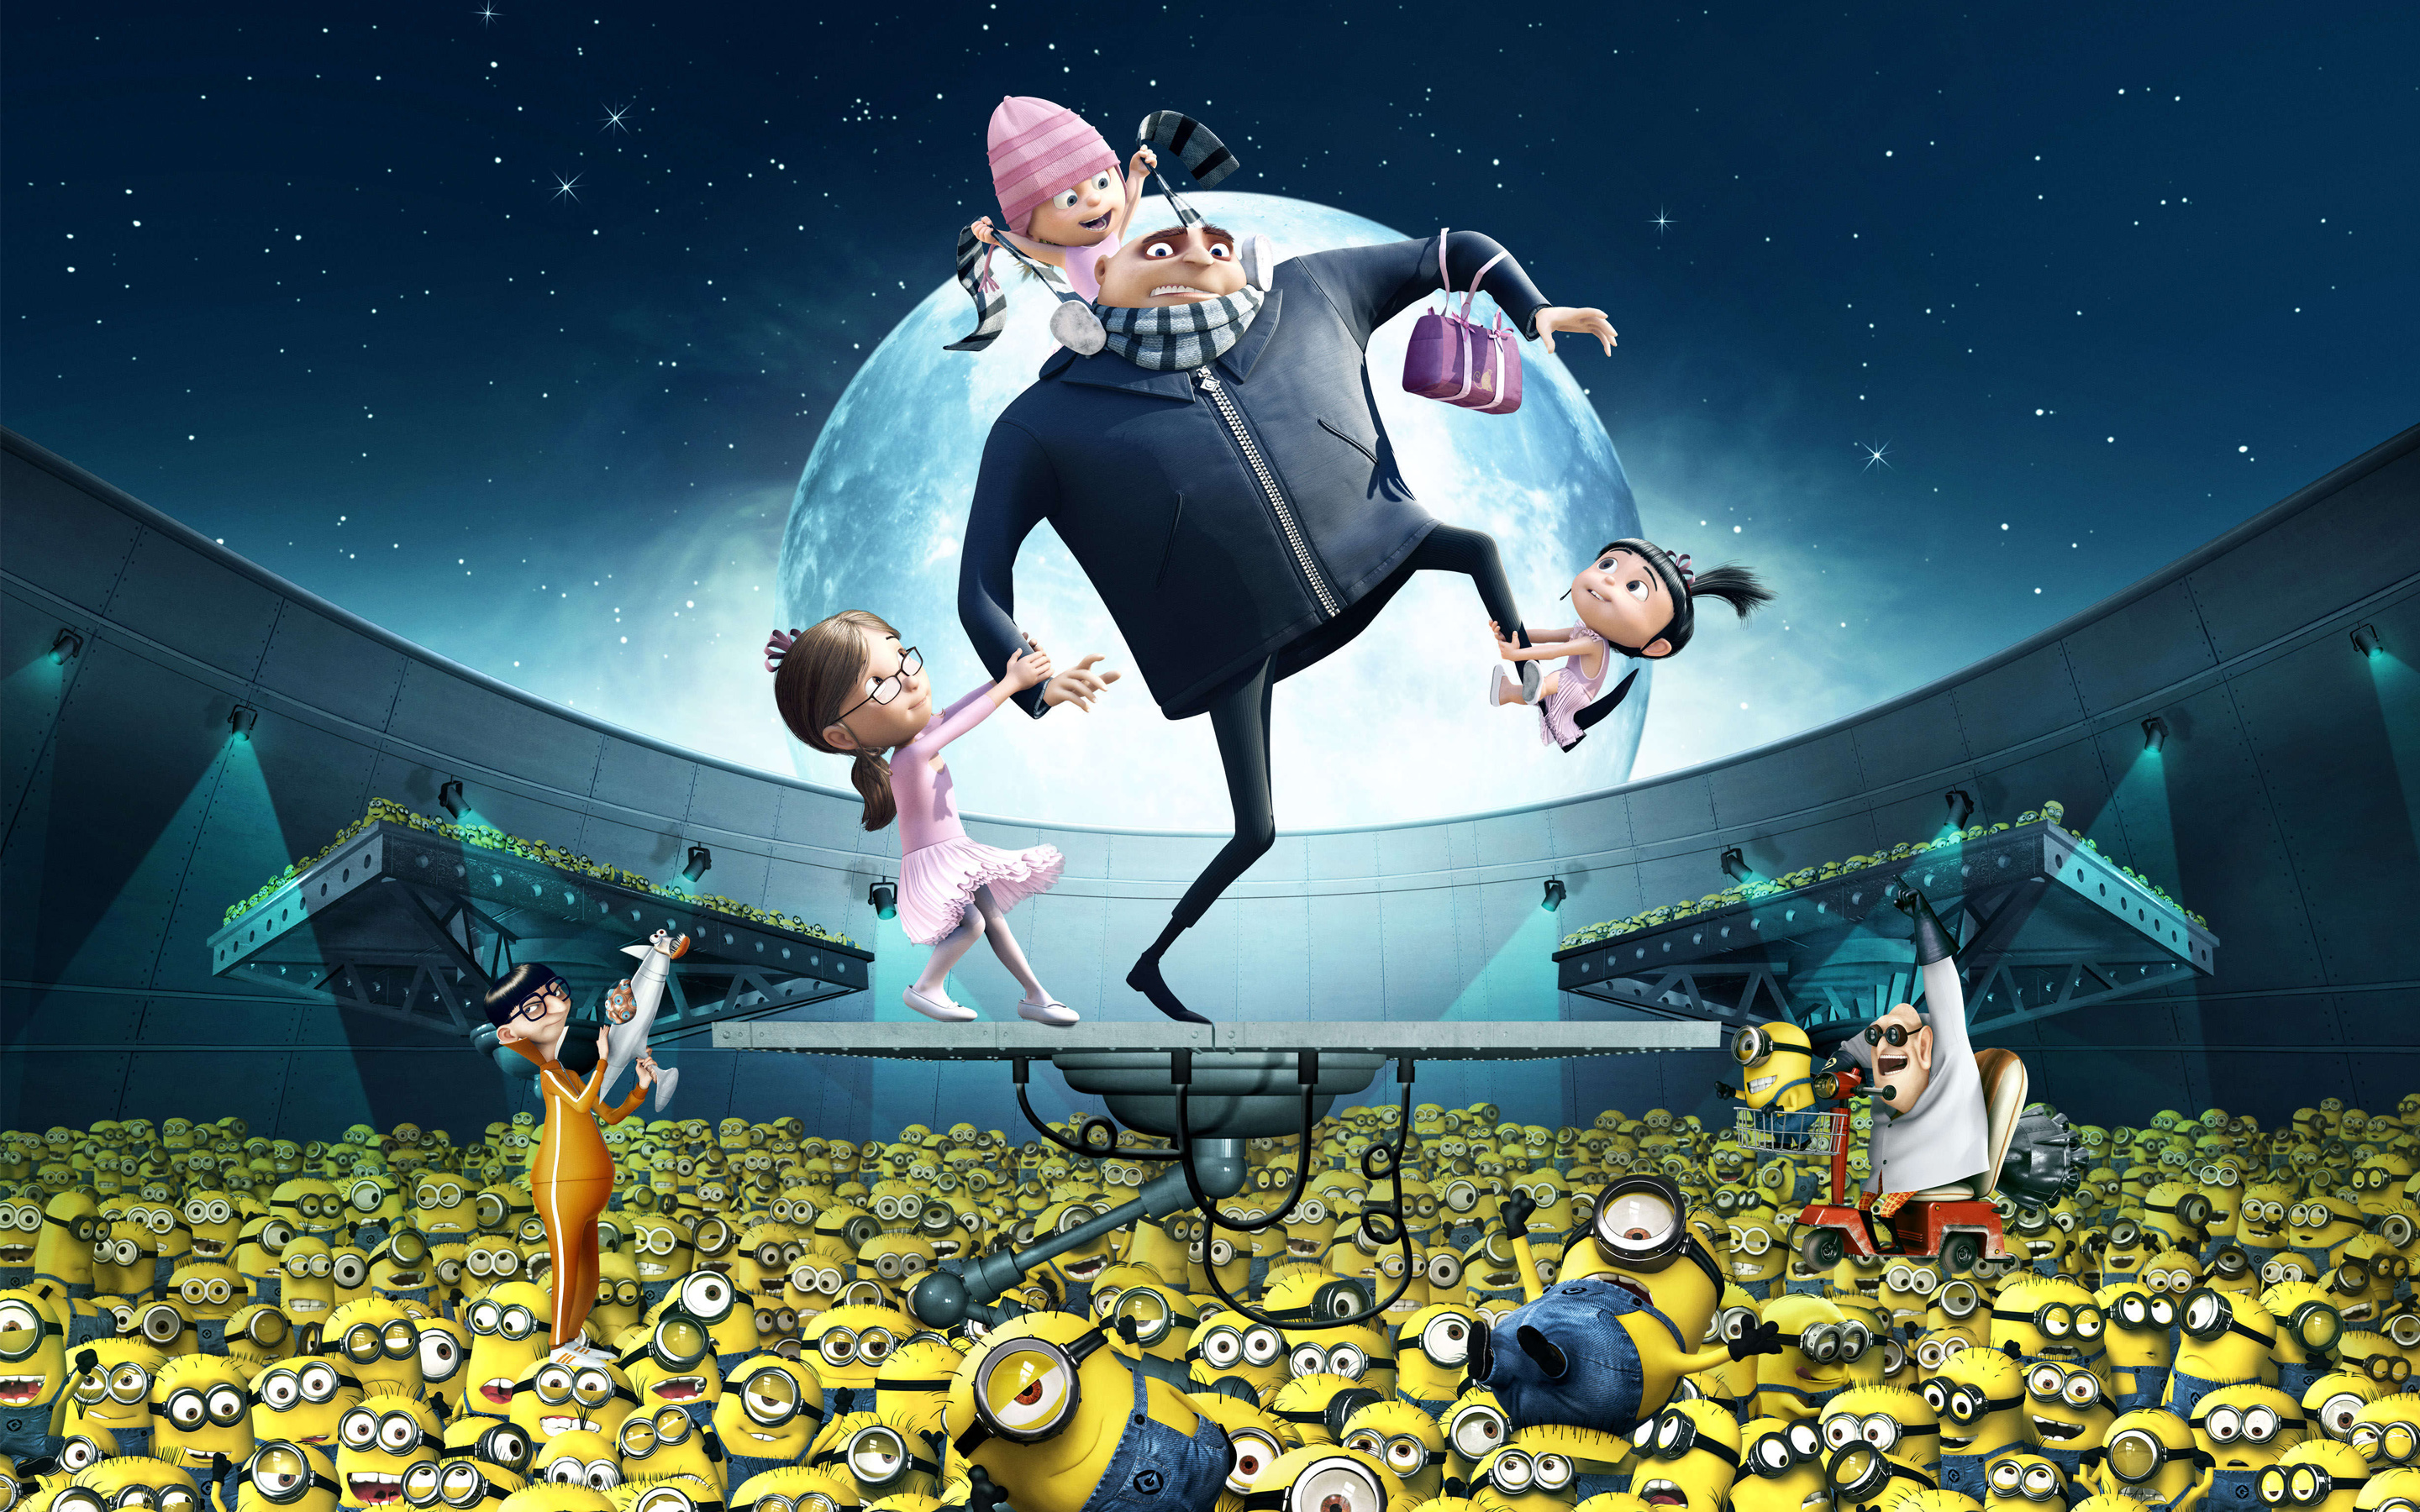 Wallpaper ID 480800  Movie Despicable Me Phone Wallpaper  720x1280 free  download